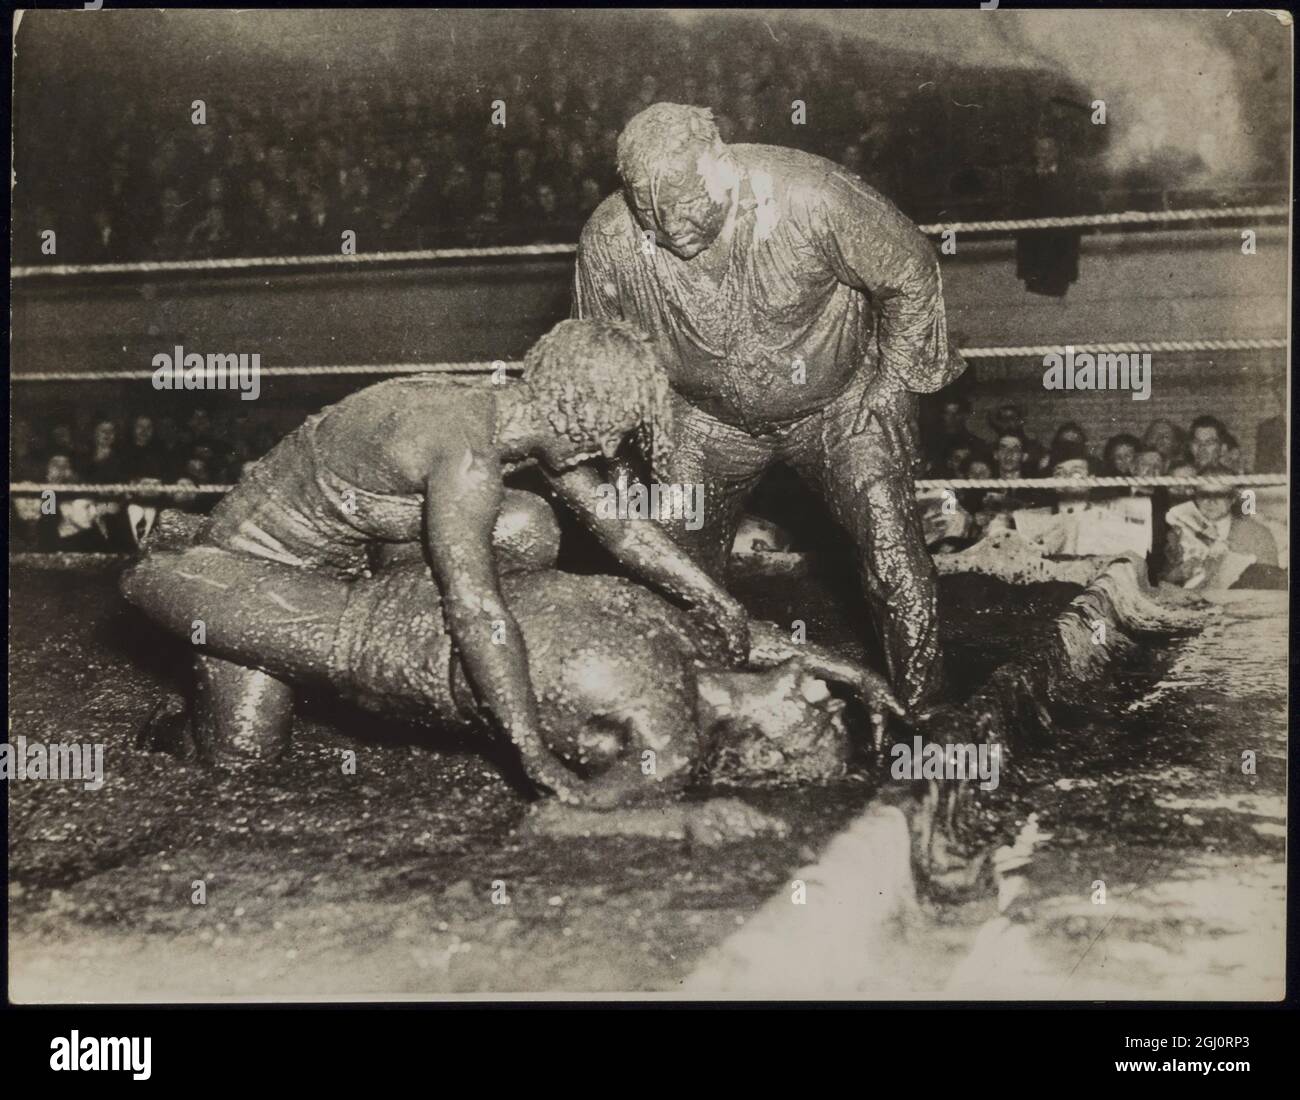 THESE GIRLS LIKE EXERCISE WITH THEIR ''MUD PACK''! Mildred (Cyclone) Burke of Kansas City, Missouri, claimant to the women's wrestling championship of the world, end Leona (Babe) Gordon of Chicago gave each other a mud pack ''treatment'' when they took pert in a Hindu-style wrestling match in a mud-filled ring at Akron, Ohio. Miss Burke scored a one-fall victory. PHOTO SHOWS:- Mildred (Cyclone) Burke (on top) pins her equally muddy opponent, Leone (Babe) Gordon, in the viscous mess as Ernie Maddock, the referee, is about to tap Miss Burke on the shoulder to declare her the winner. The referee Stock Photo